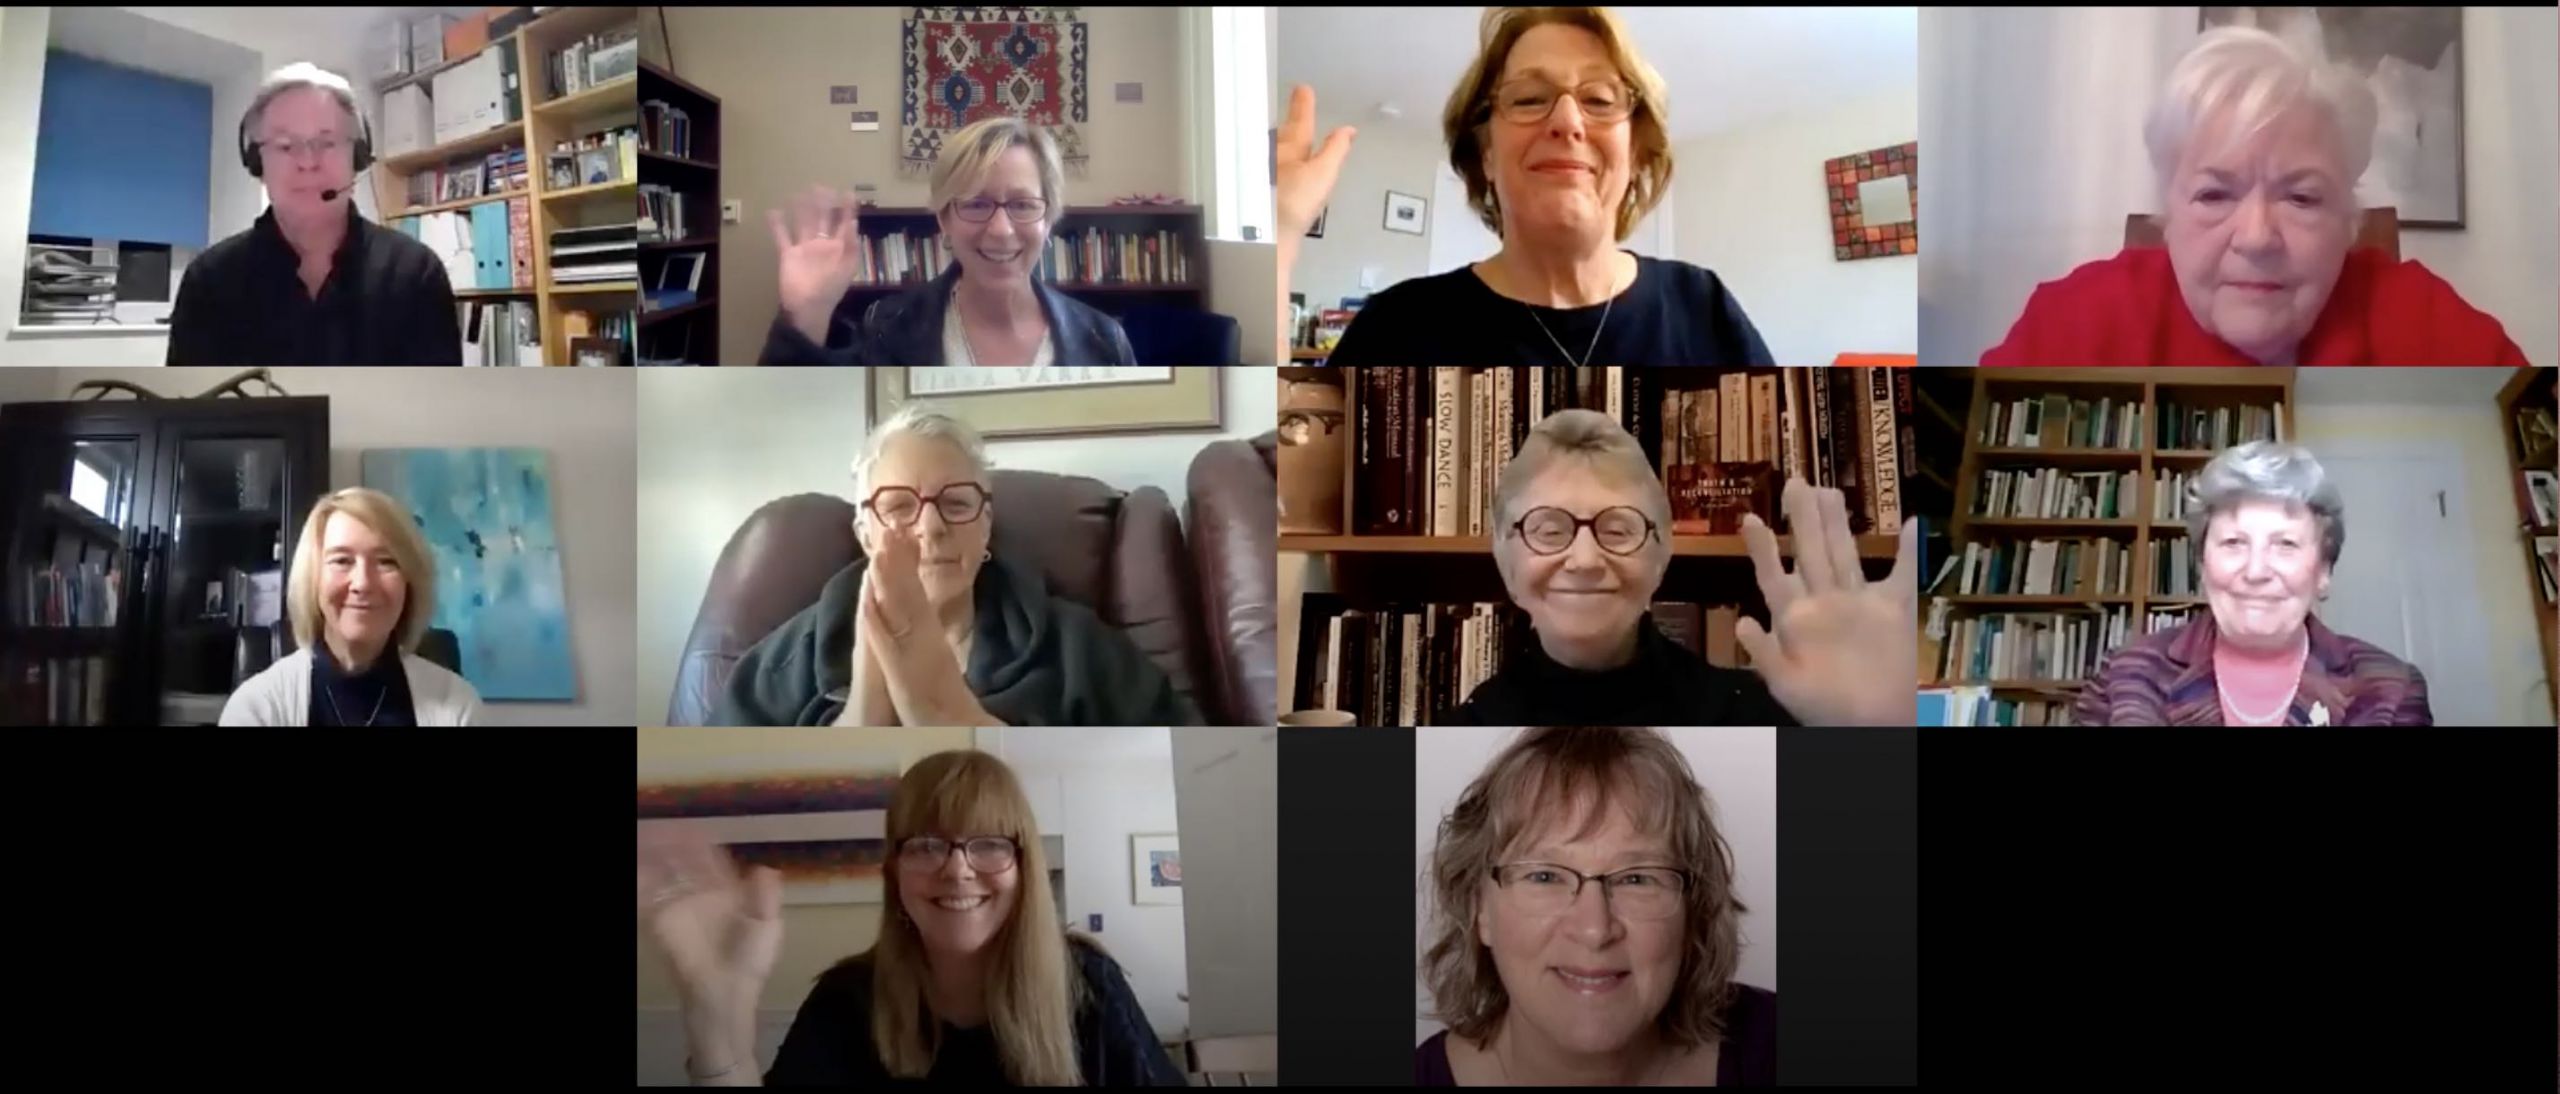 uci center for nursing philosophy and ipons co-host a virtual panel addressing nursing theory, education and practice